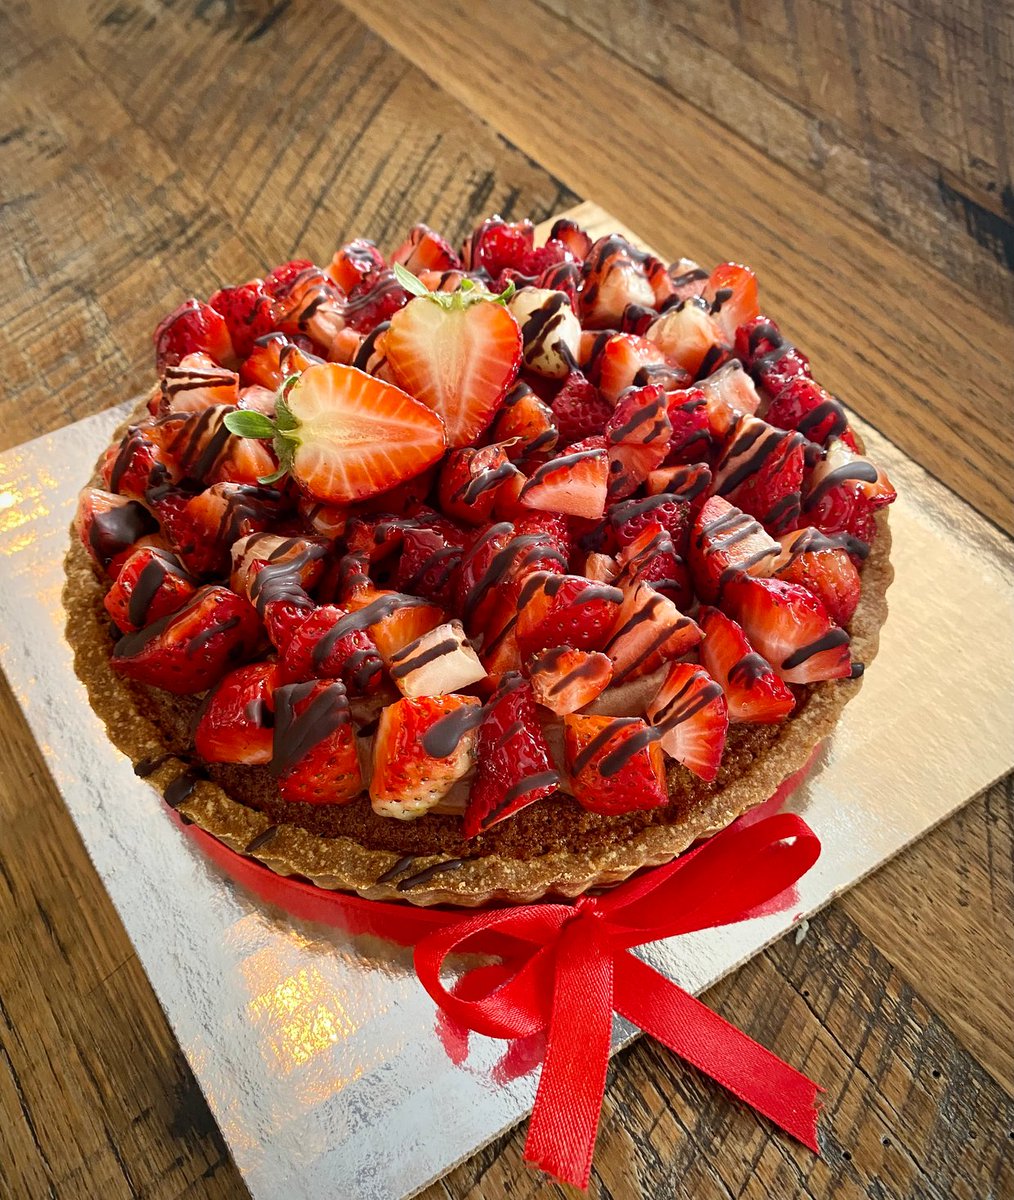 Does your mom require gluten-free? If so, head to @kirari_west, as they are preparing some of their popular gluten-free strawberry chocolate tarts for walk-ins.  #RedondoBeach #SouthBayLA